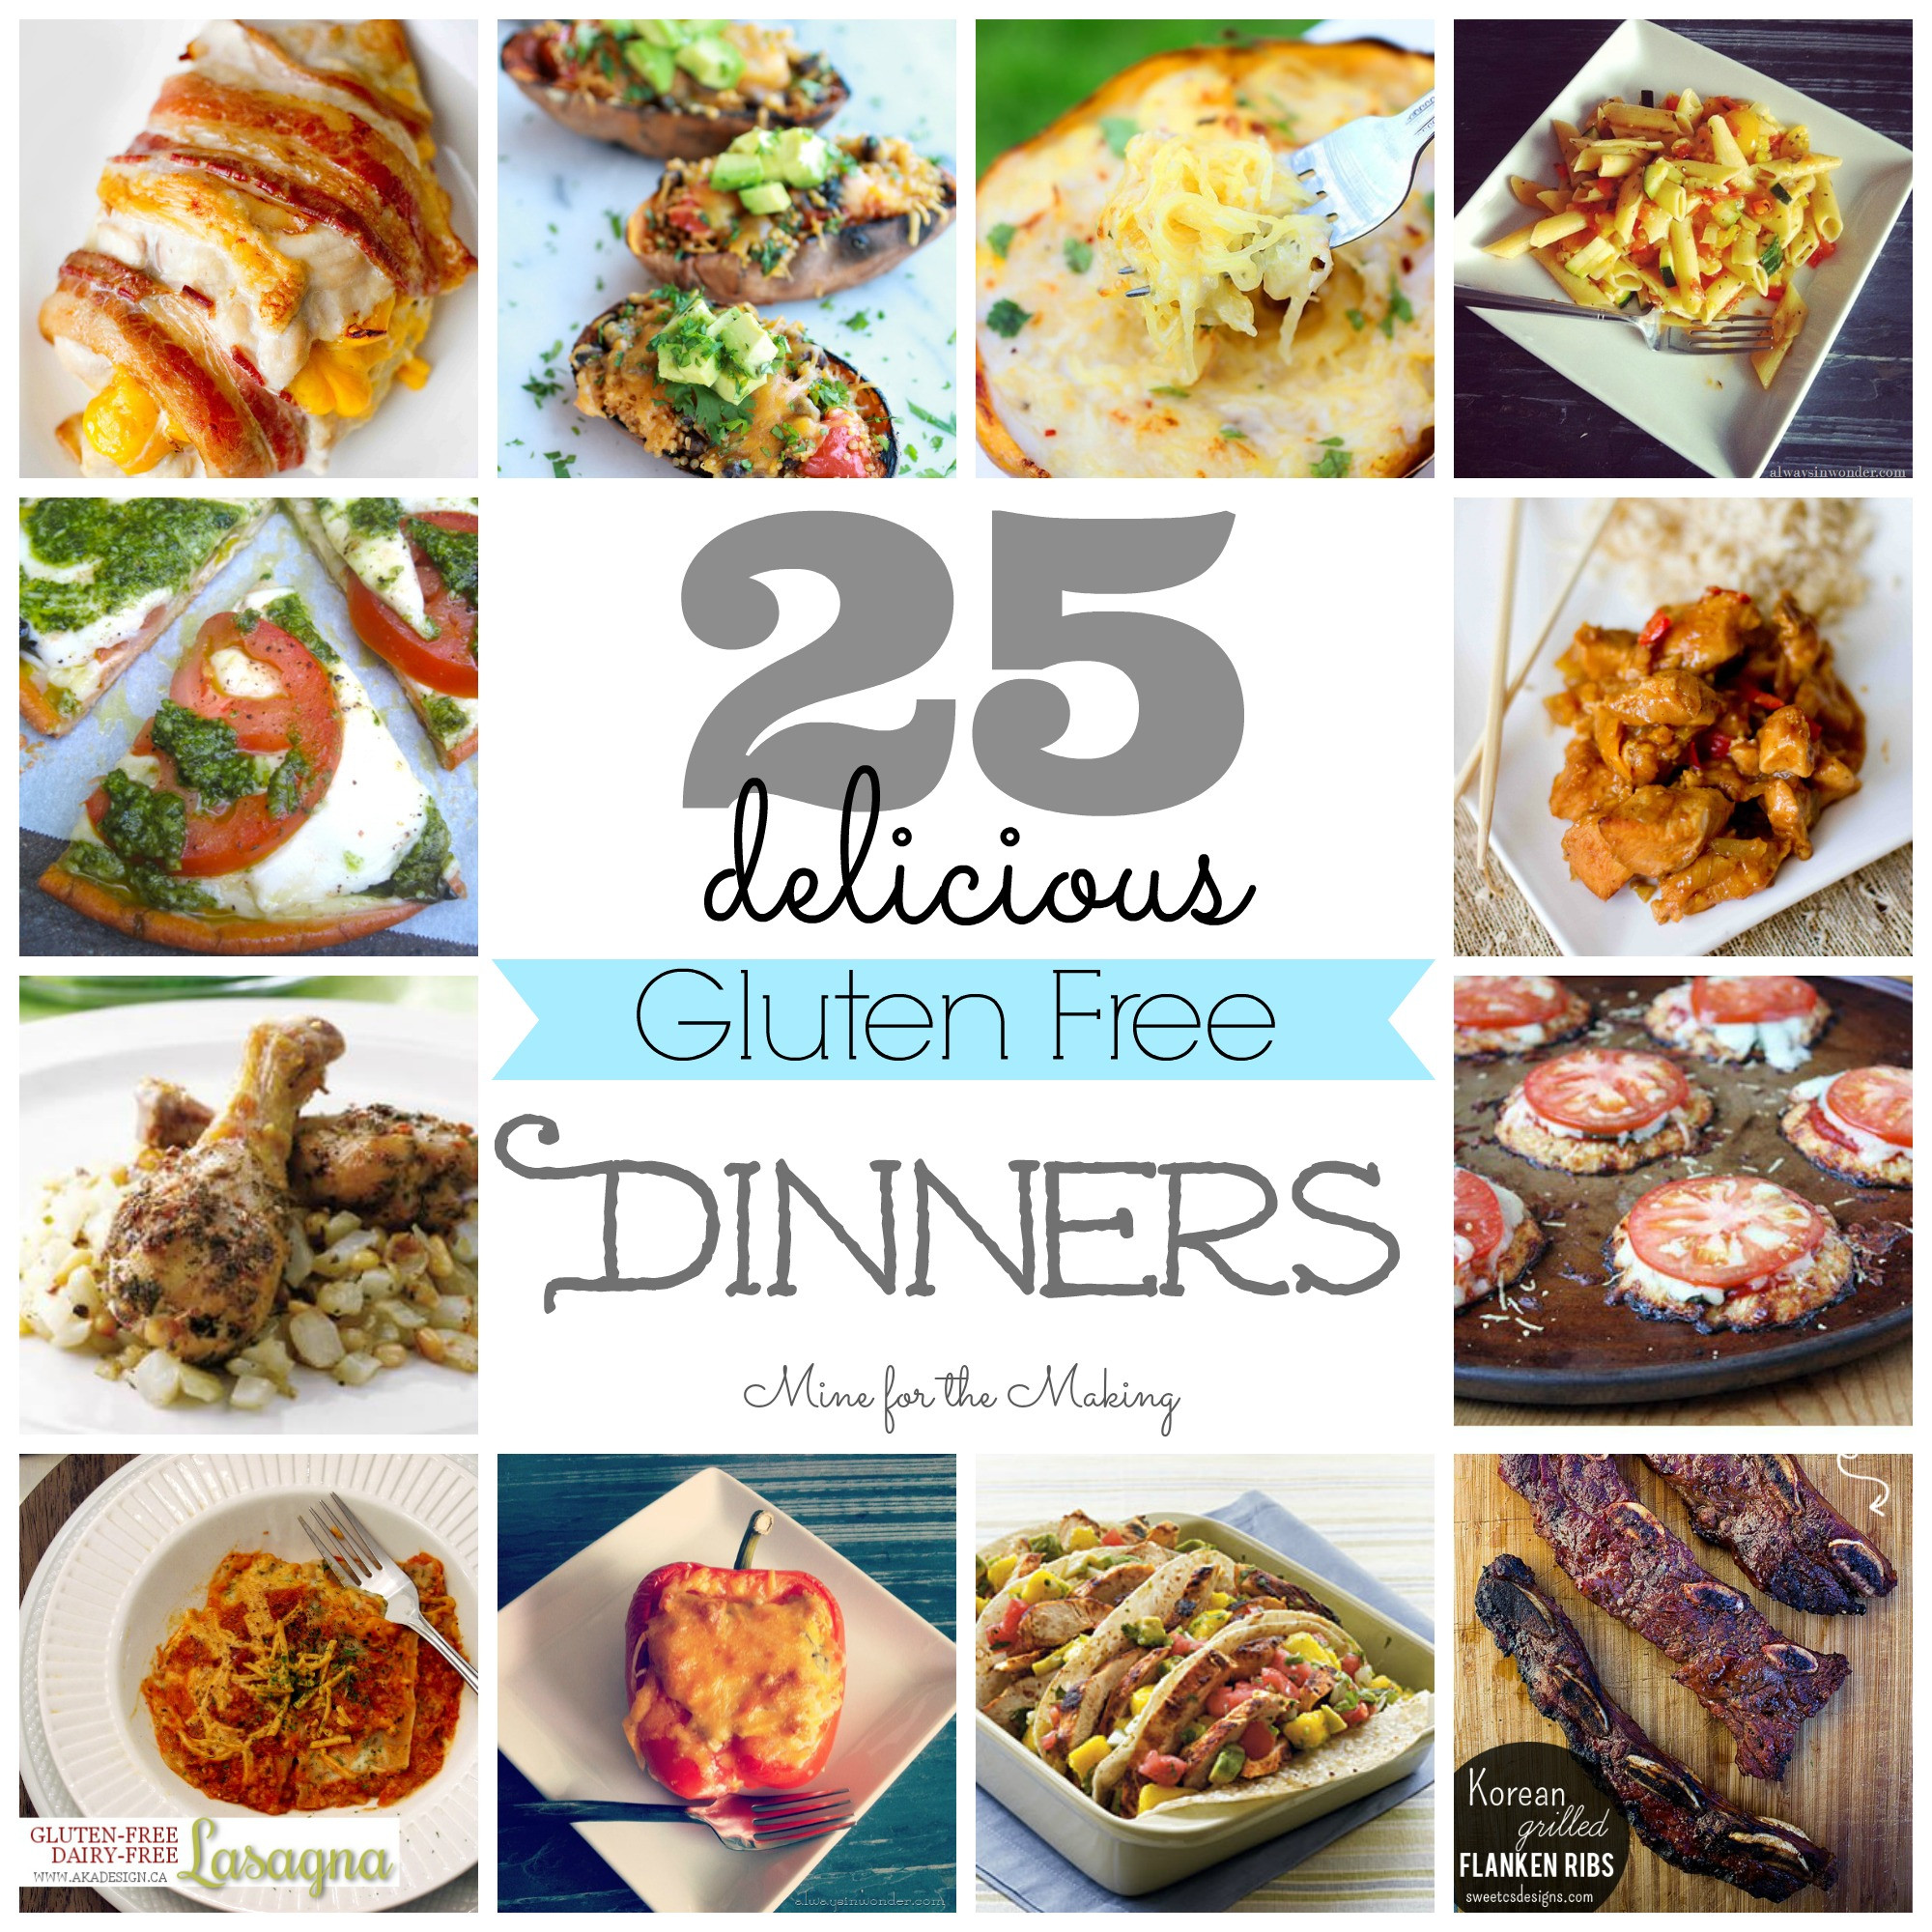 Gluten Free Thanksgiving Dinner
 Food a licious Friday 25 Delicious Gluten Free Dinners